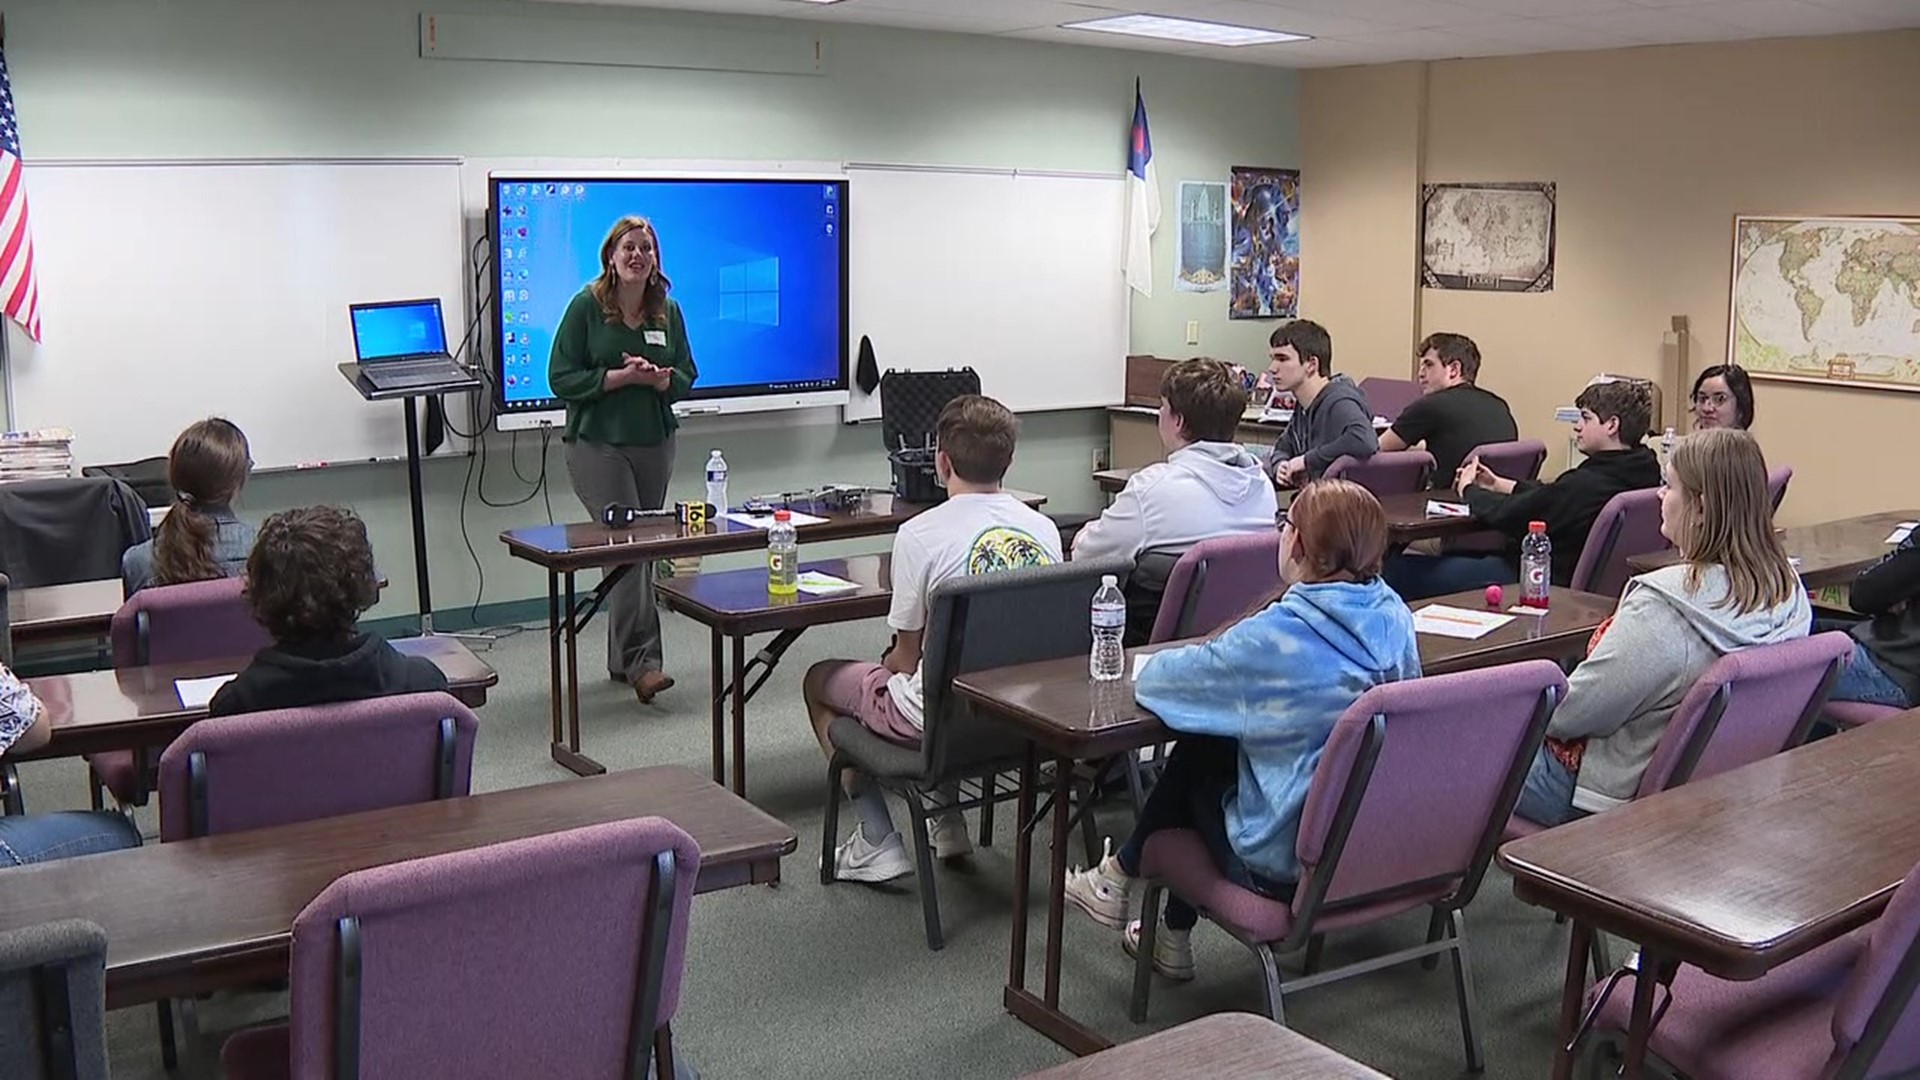 Meadowbrook Christian School hosted a career day on Friday. Newswatch 16's Nikki Krize was one of the presenters and shows us how it went.